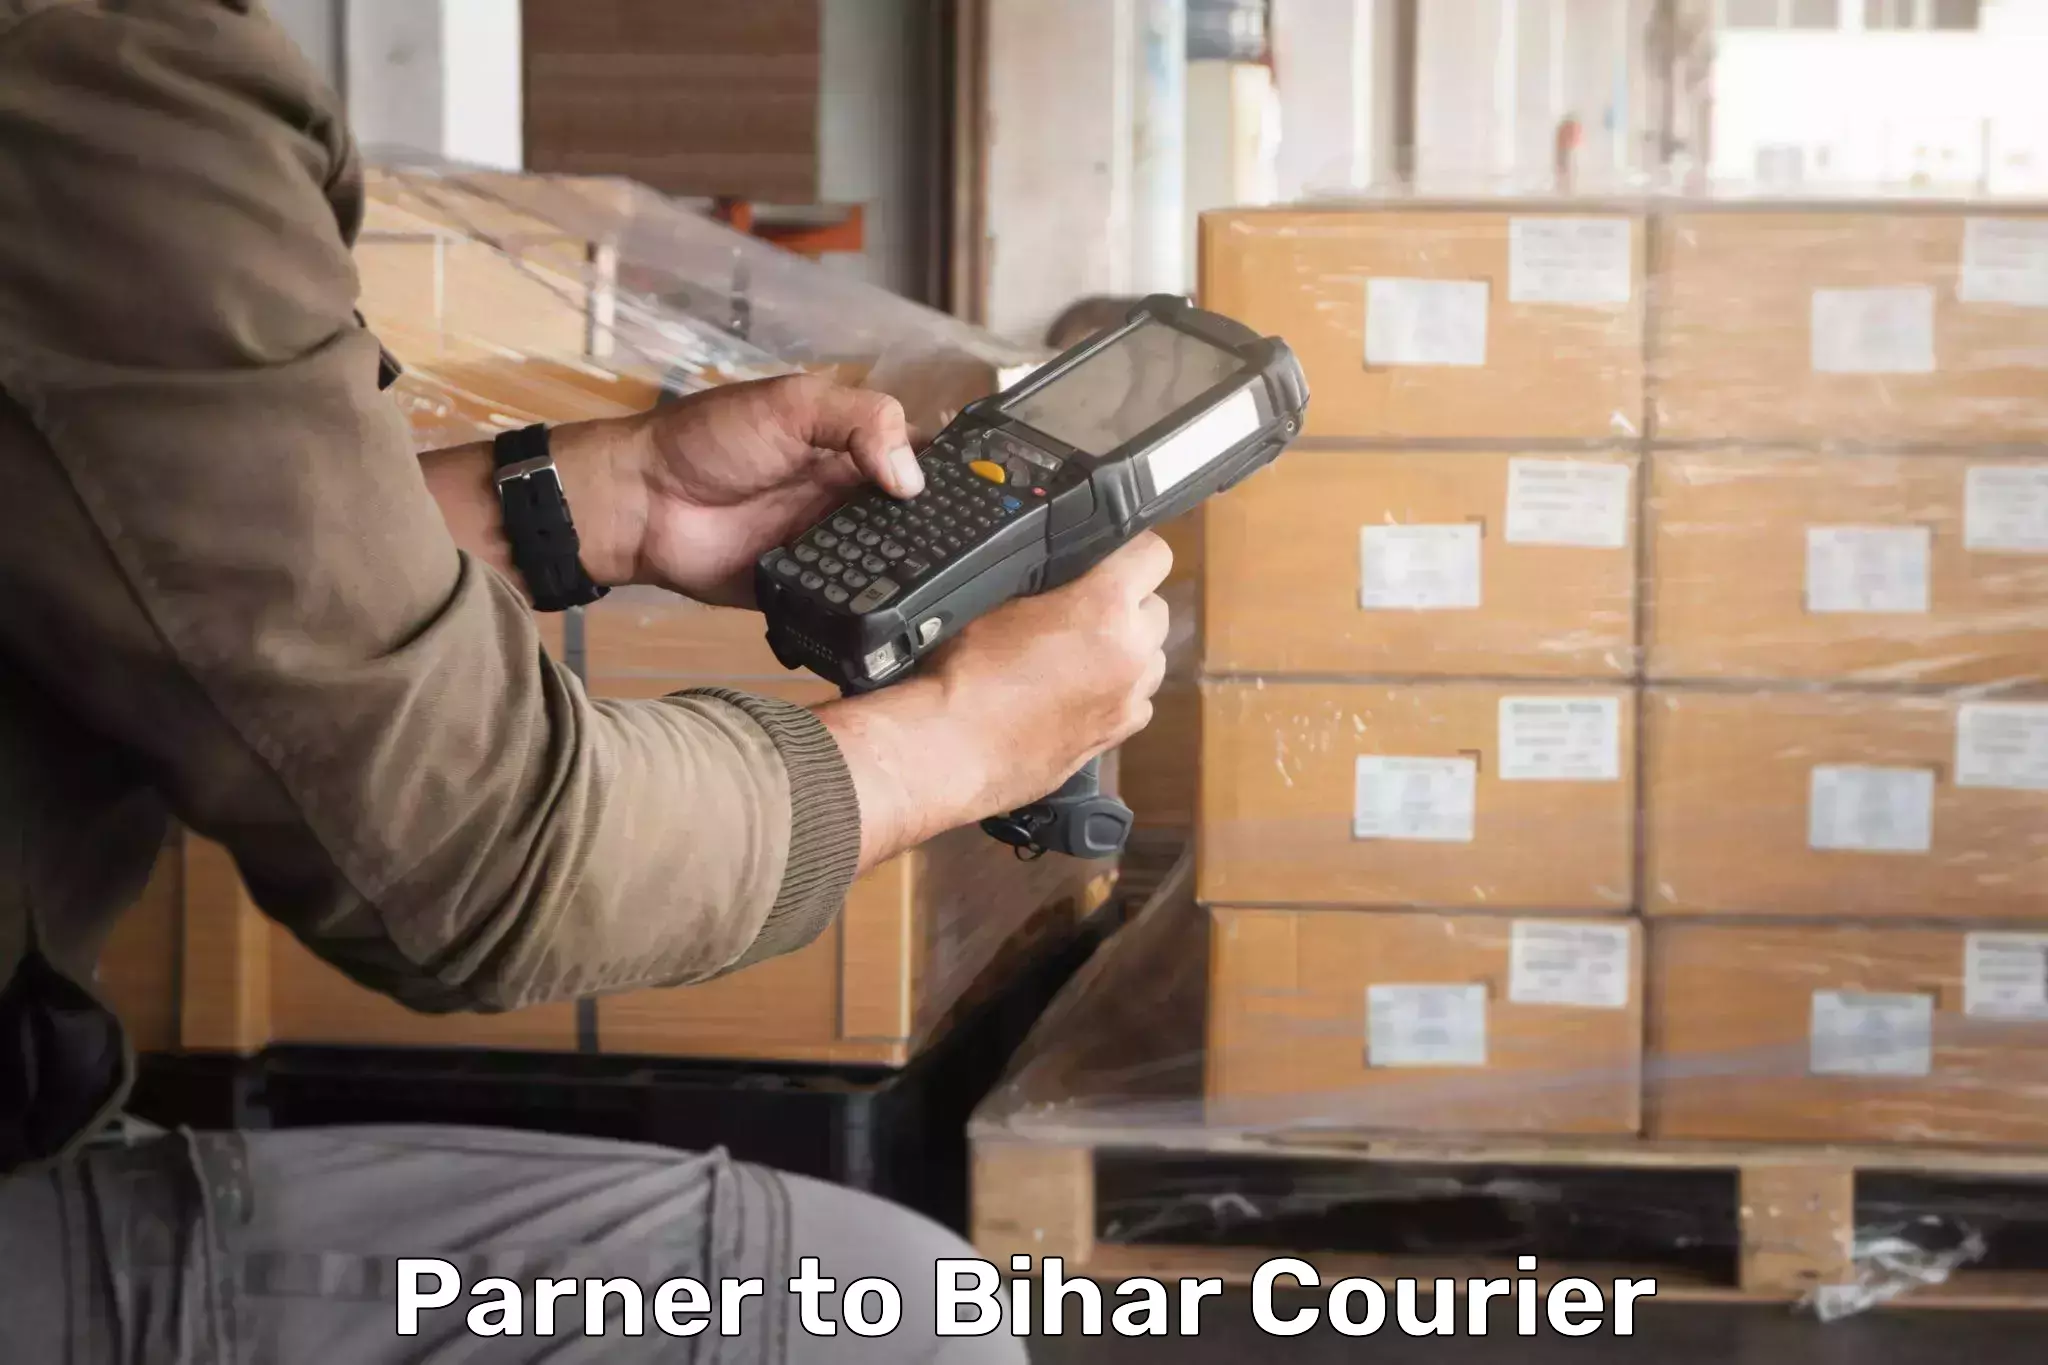 High-priority parcel service Parner to Palasi Araria